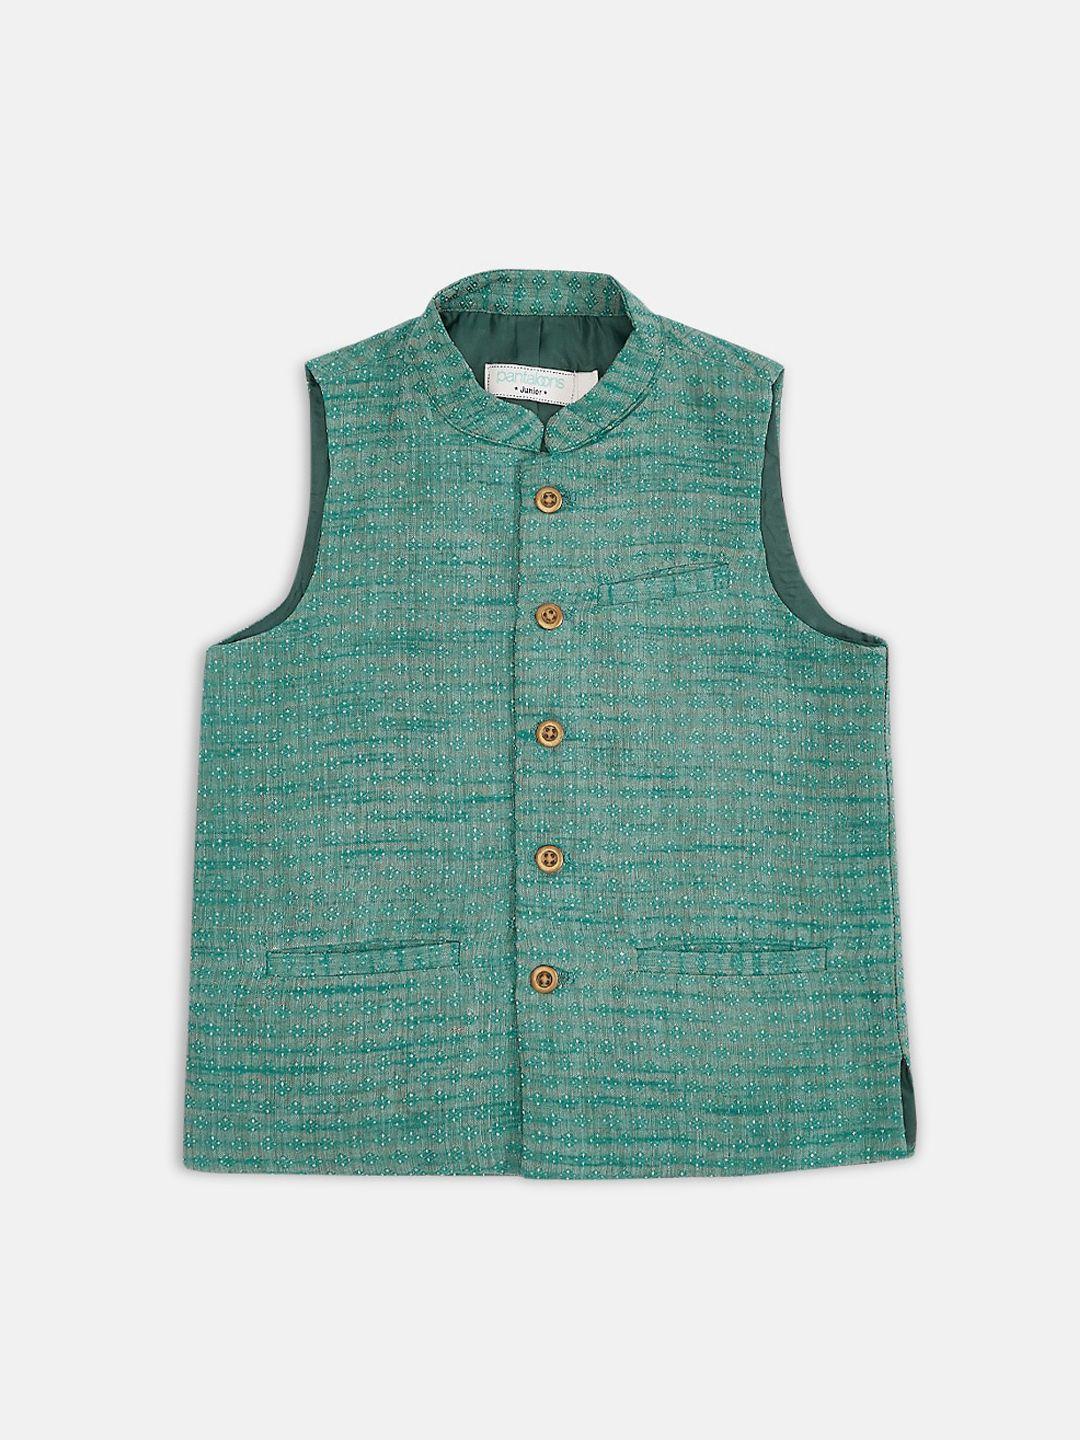 indus route by pantaloons boys teal waistcoat